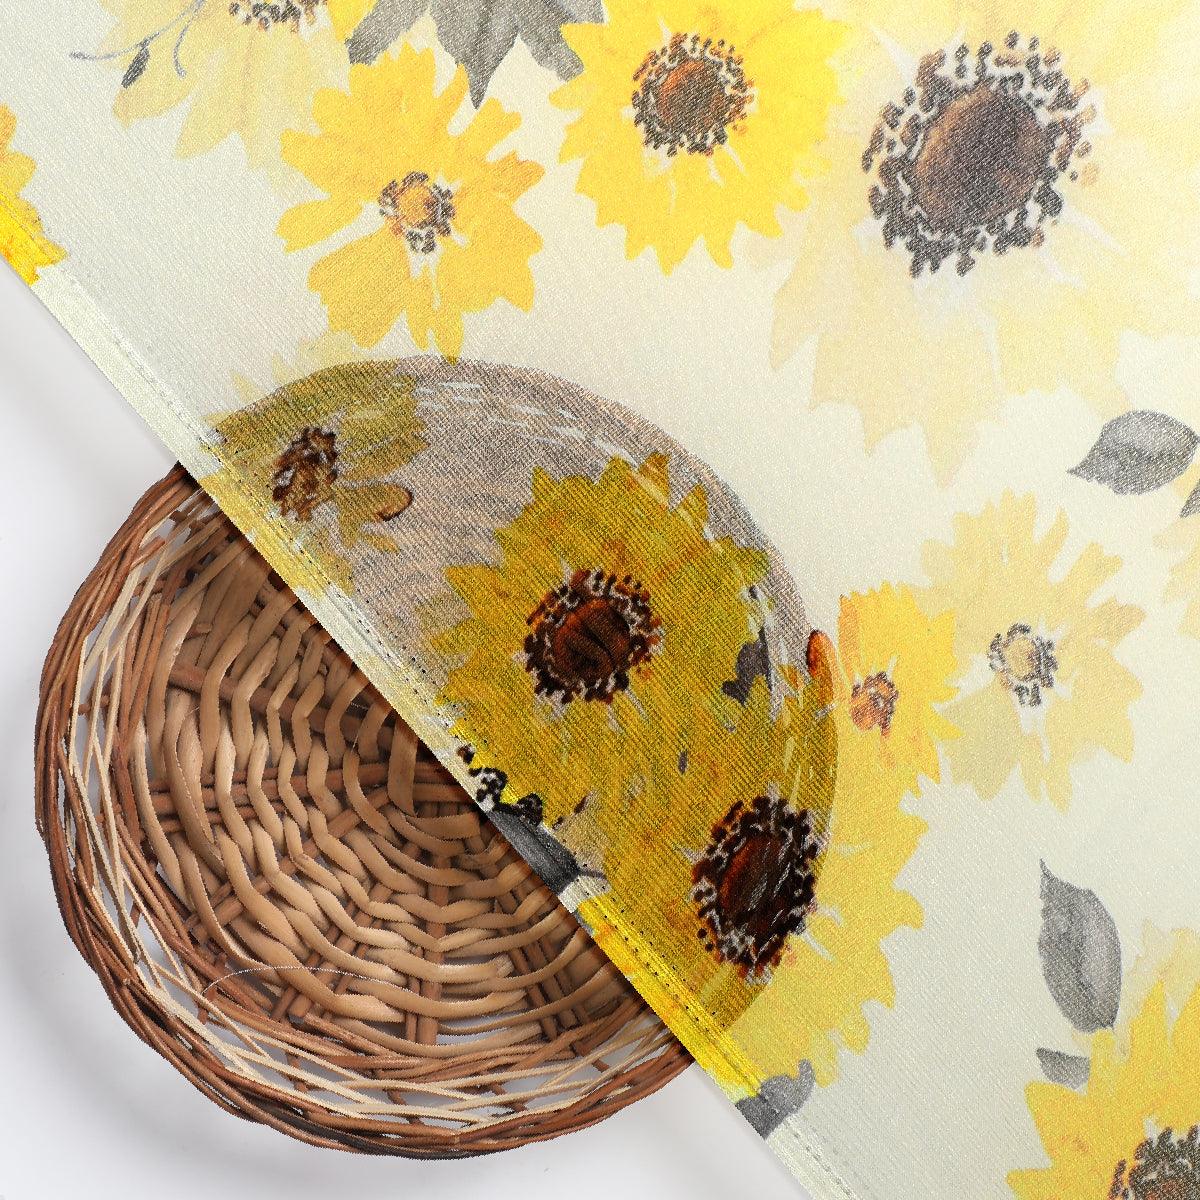 Morden Classic Yellow Sunflower Digital Printed Fabric - Pure Georgette - FAB VOGUE Studio®